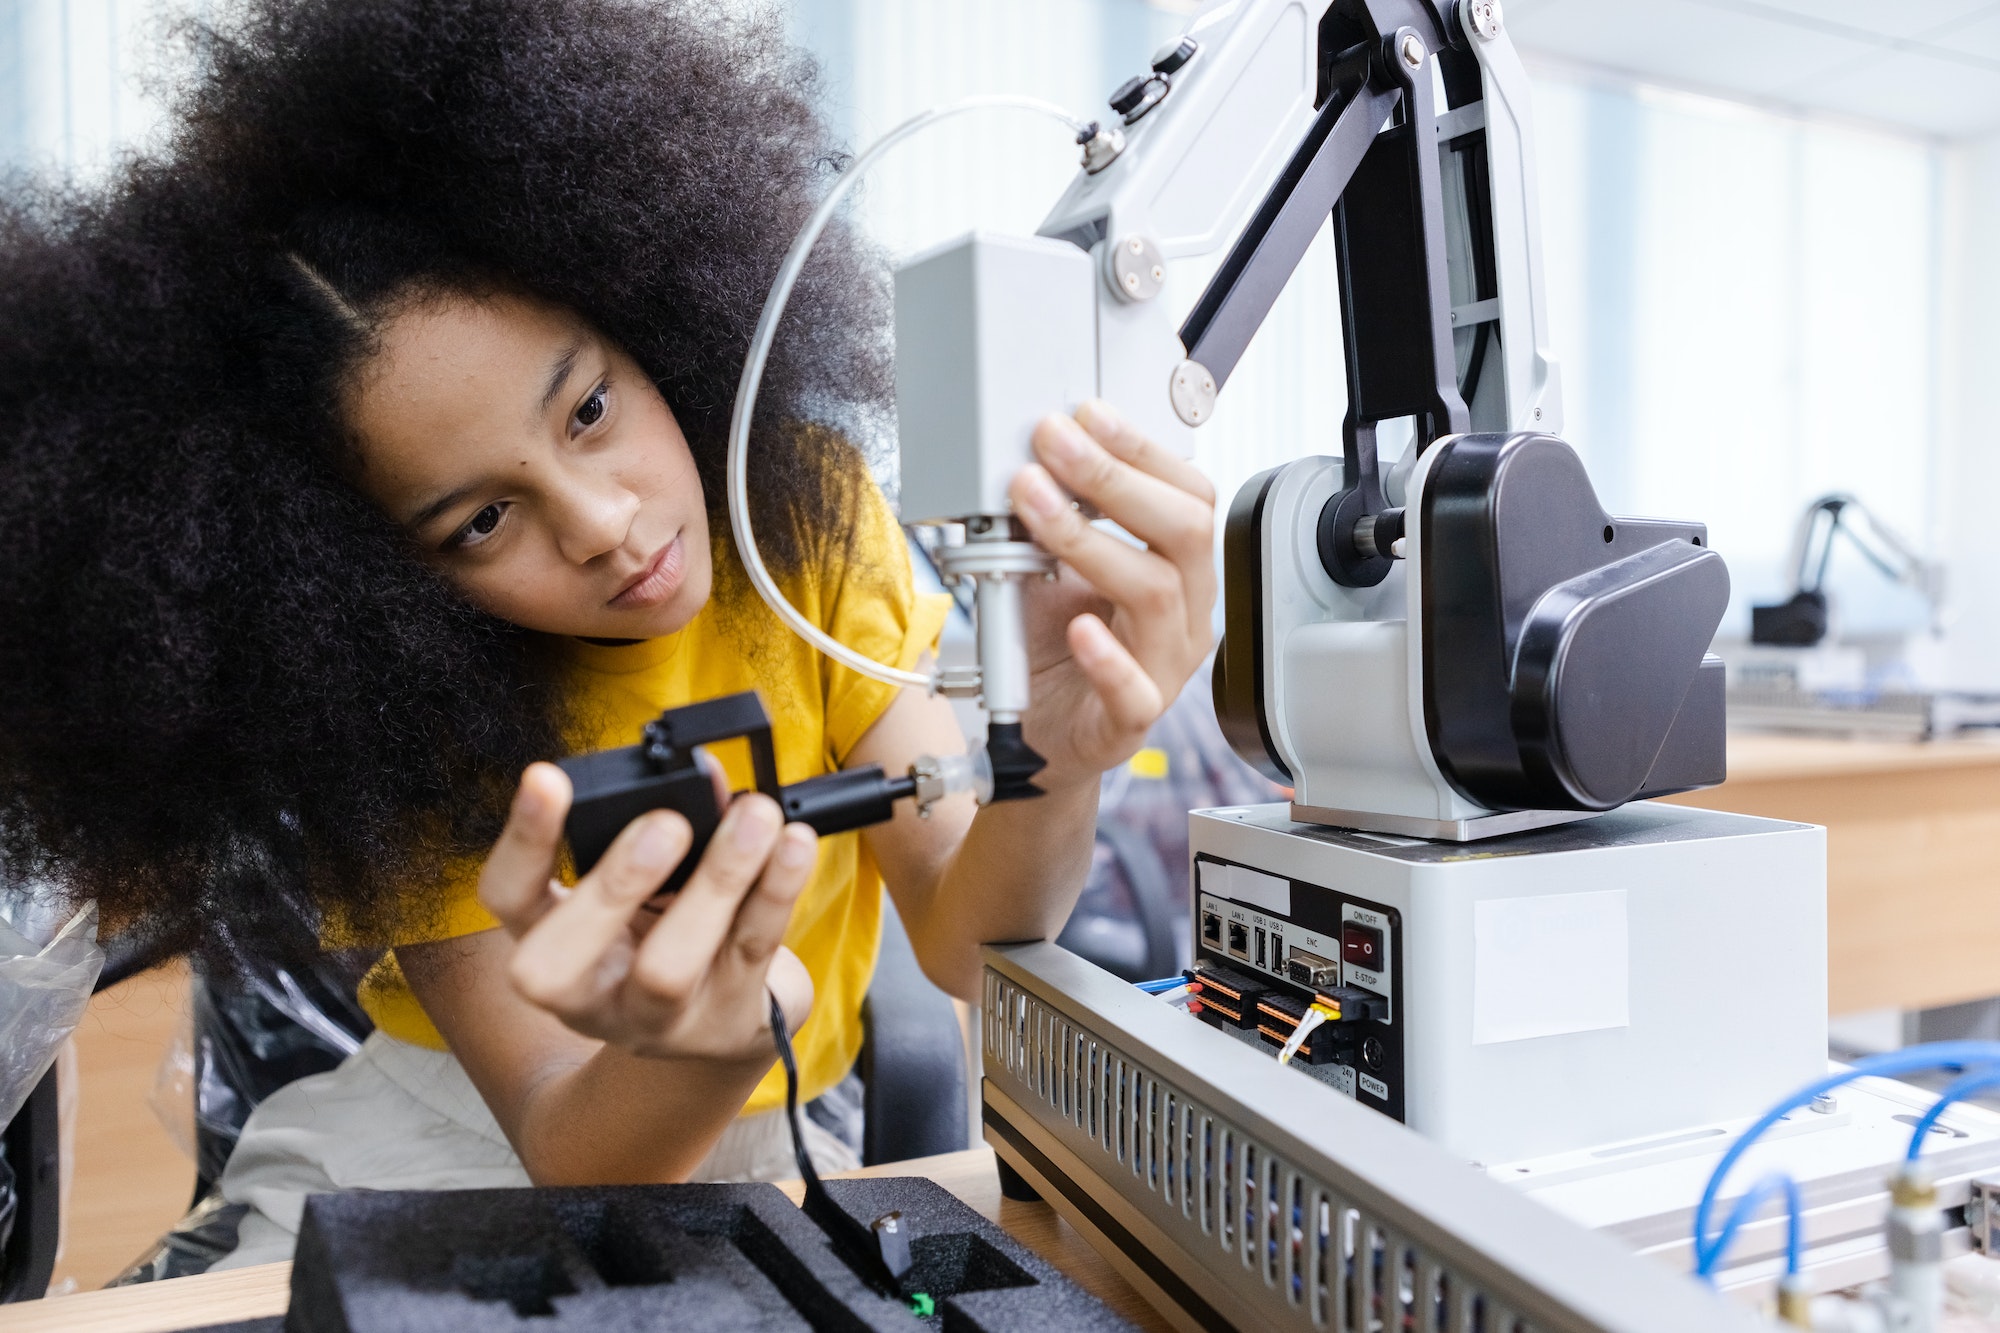 Girl with afro hairstyle wear yellow T-shirt engineer with robot for education